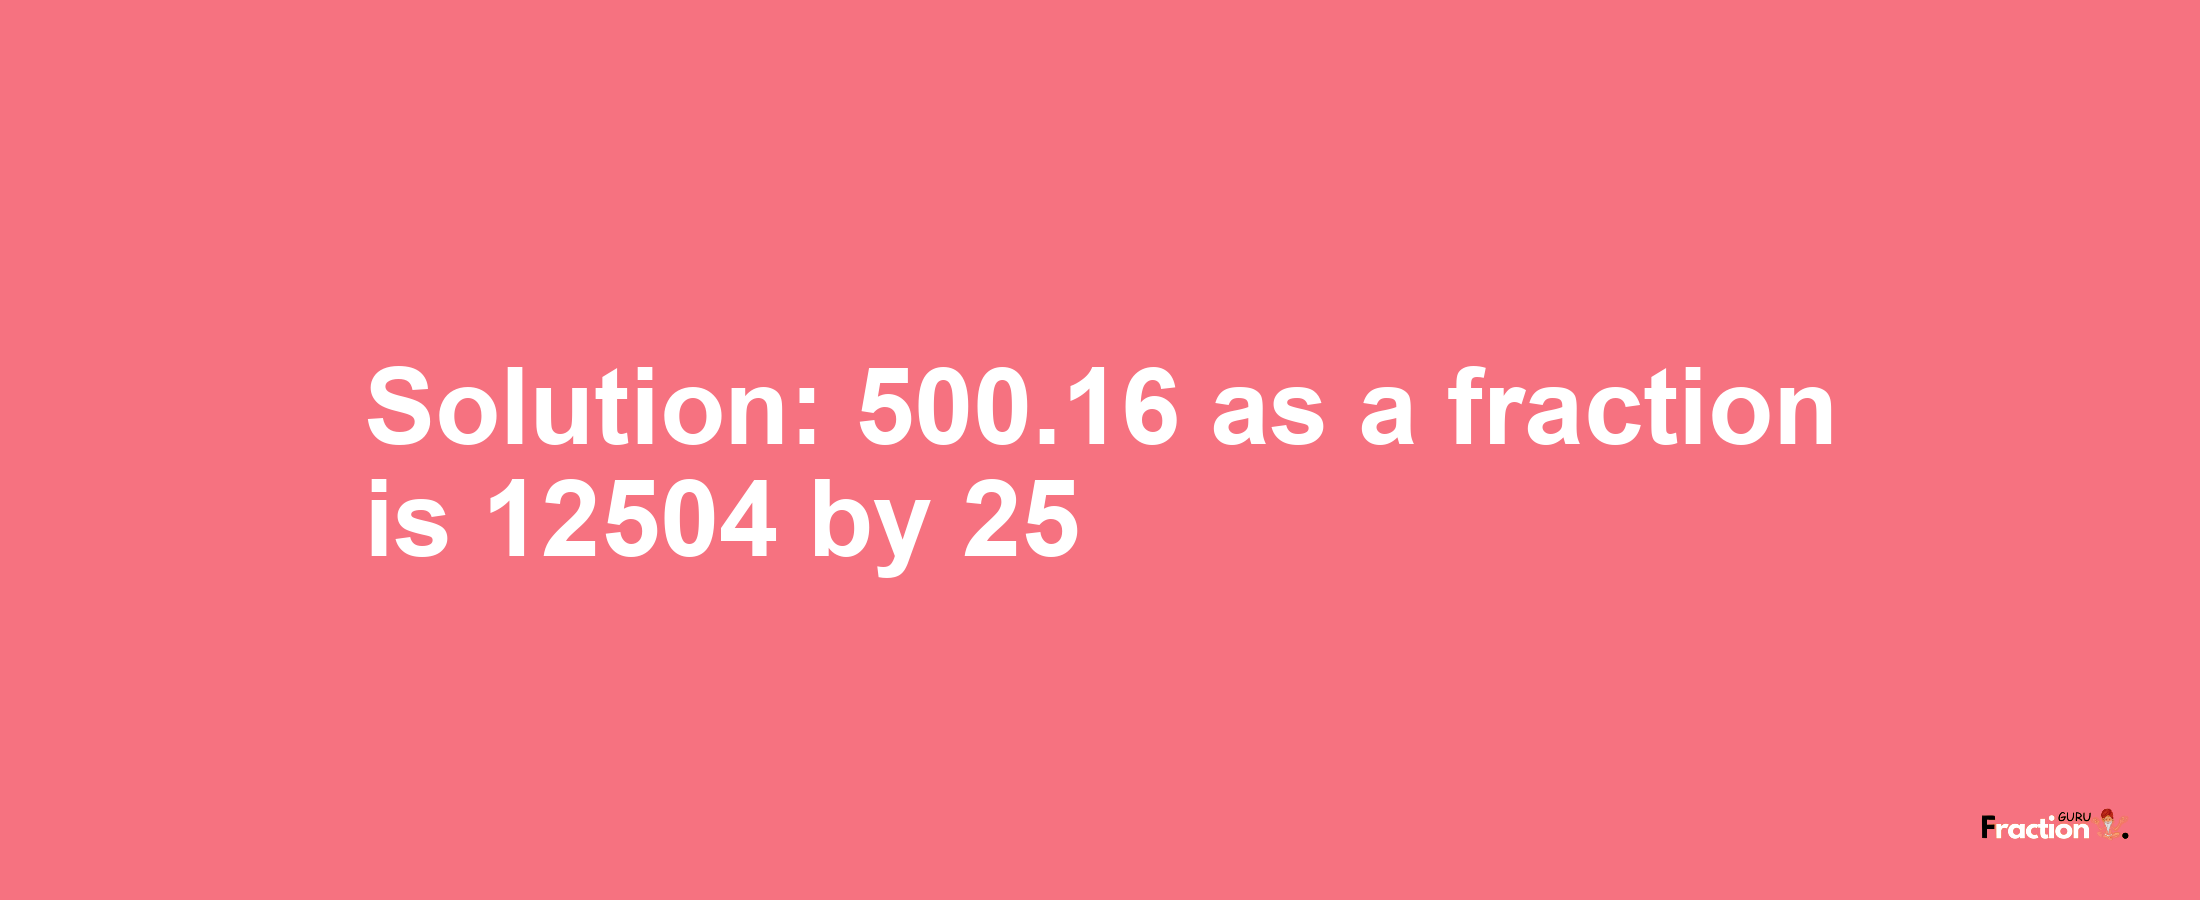 Solution:500.16 as a fraction is 12504/25